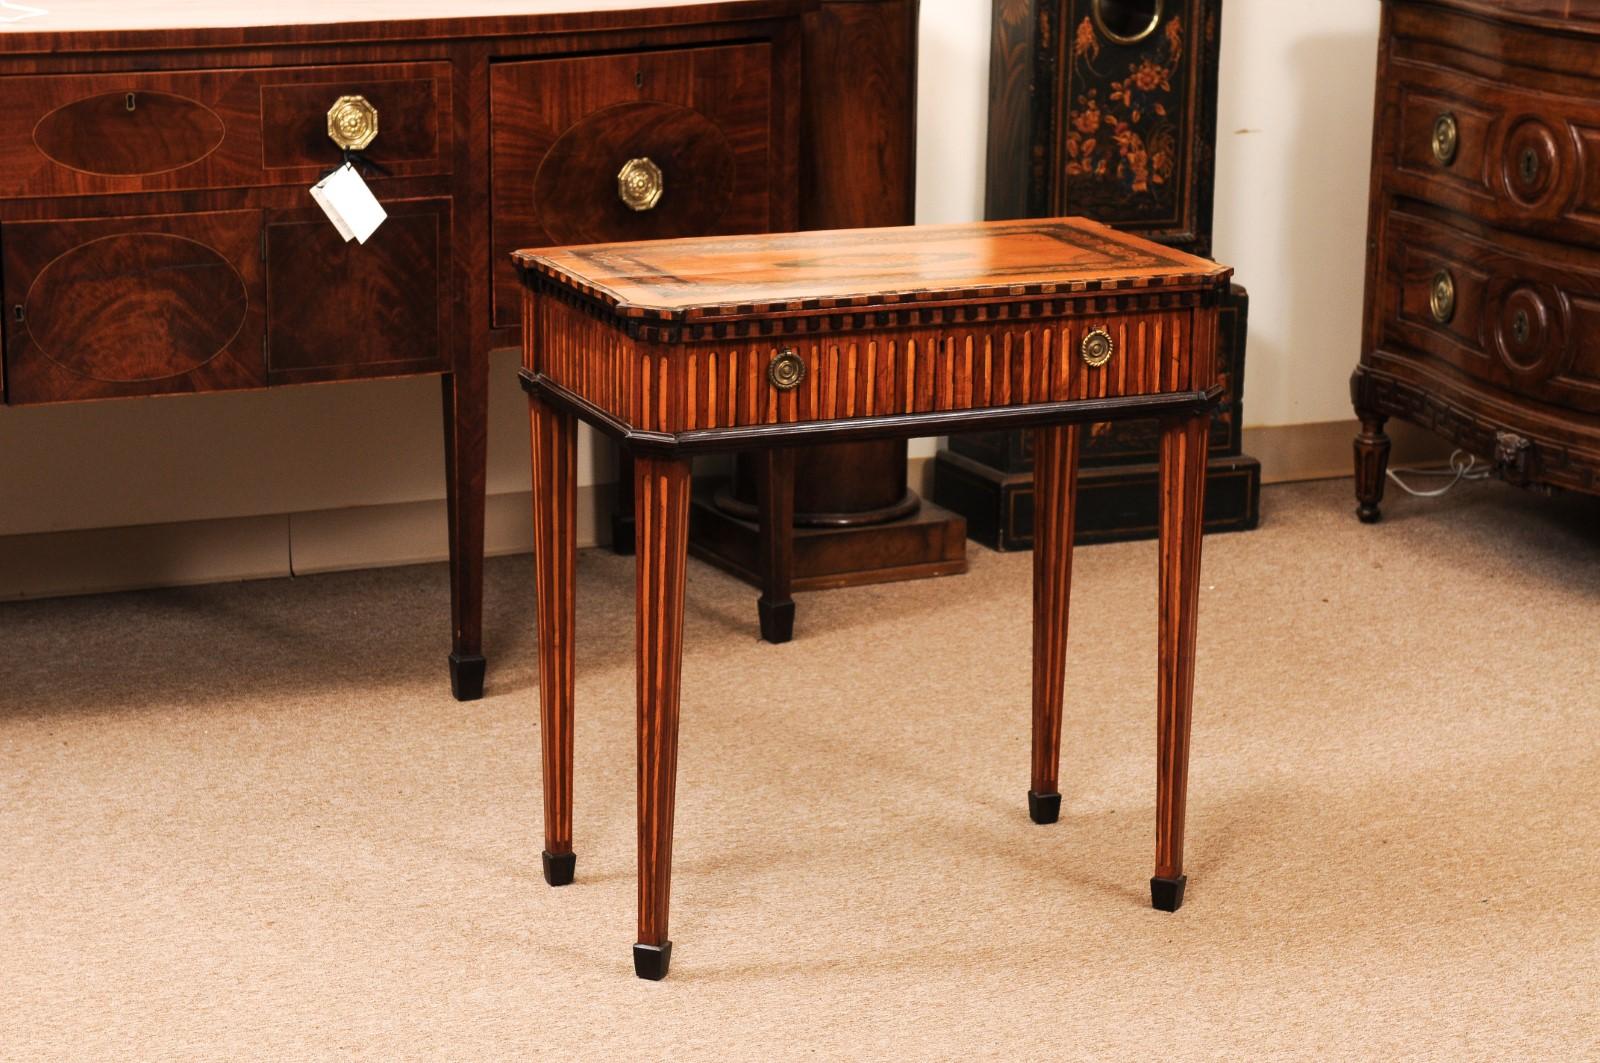 English Satinwood Inlaid Console Table with Shell Marquetry Inlay, 1 Drawer and Fluted Apron and Legs, Early 19th Century